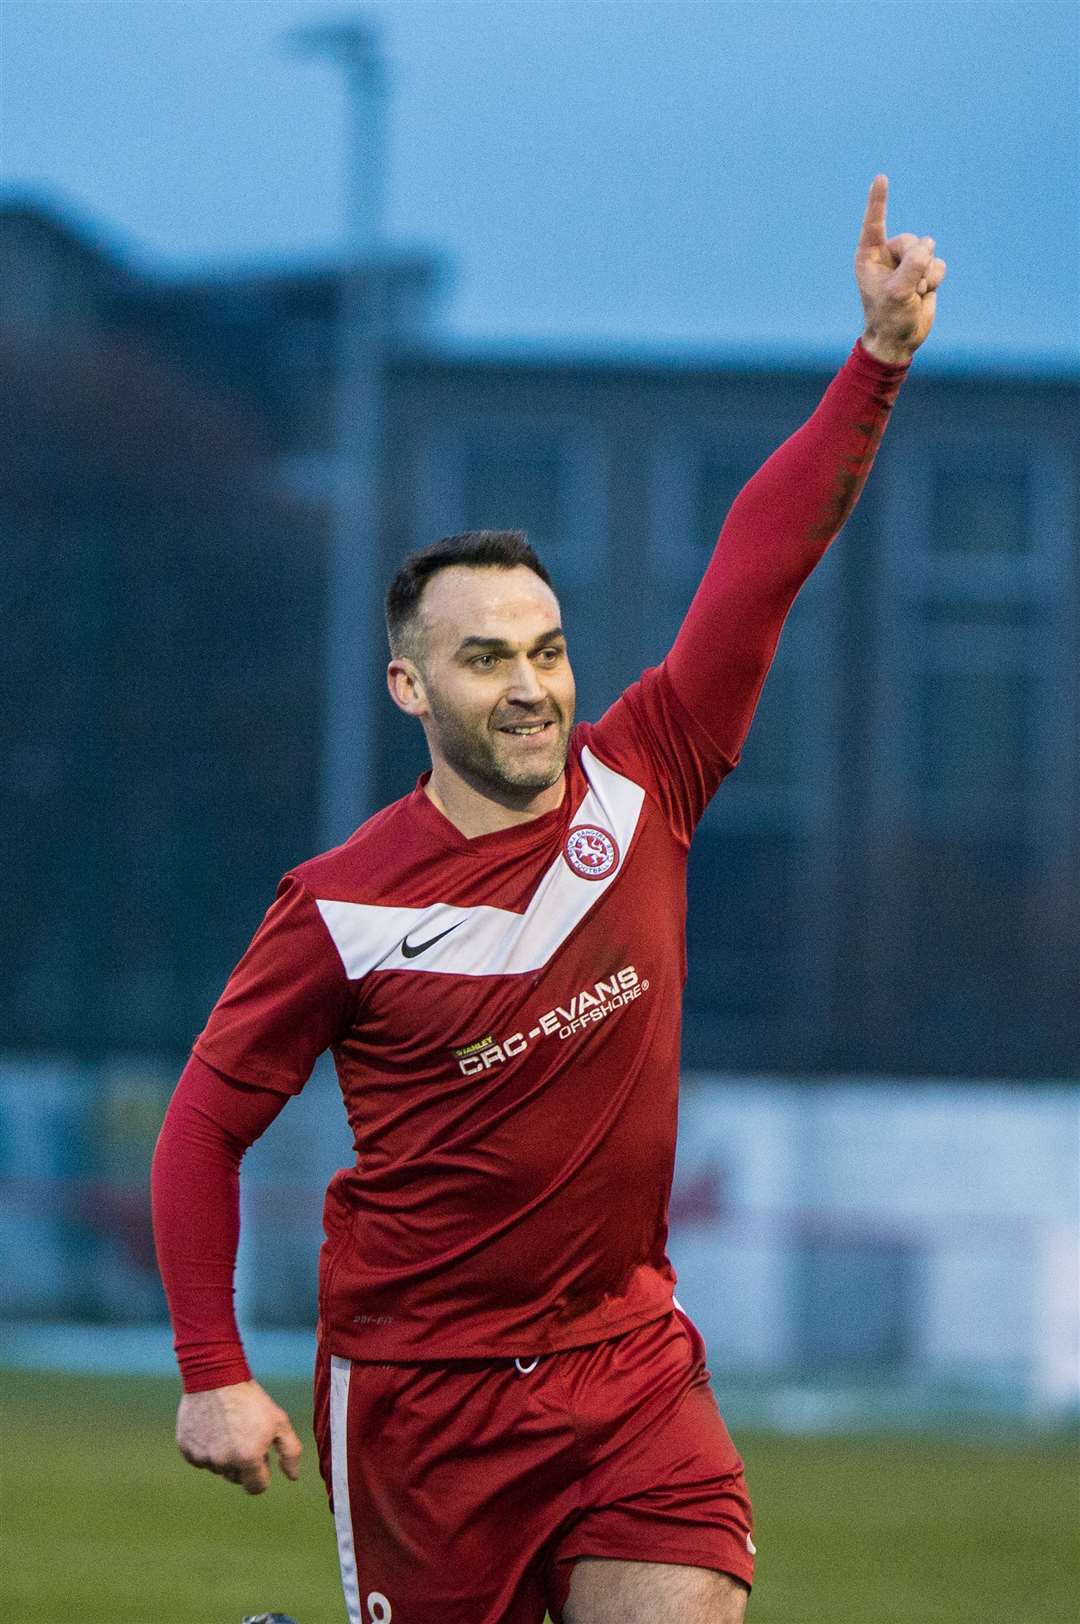 Richie Hart takes the applause after scoring a 35 yard screamer during his Brora Rangers days.